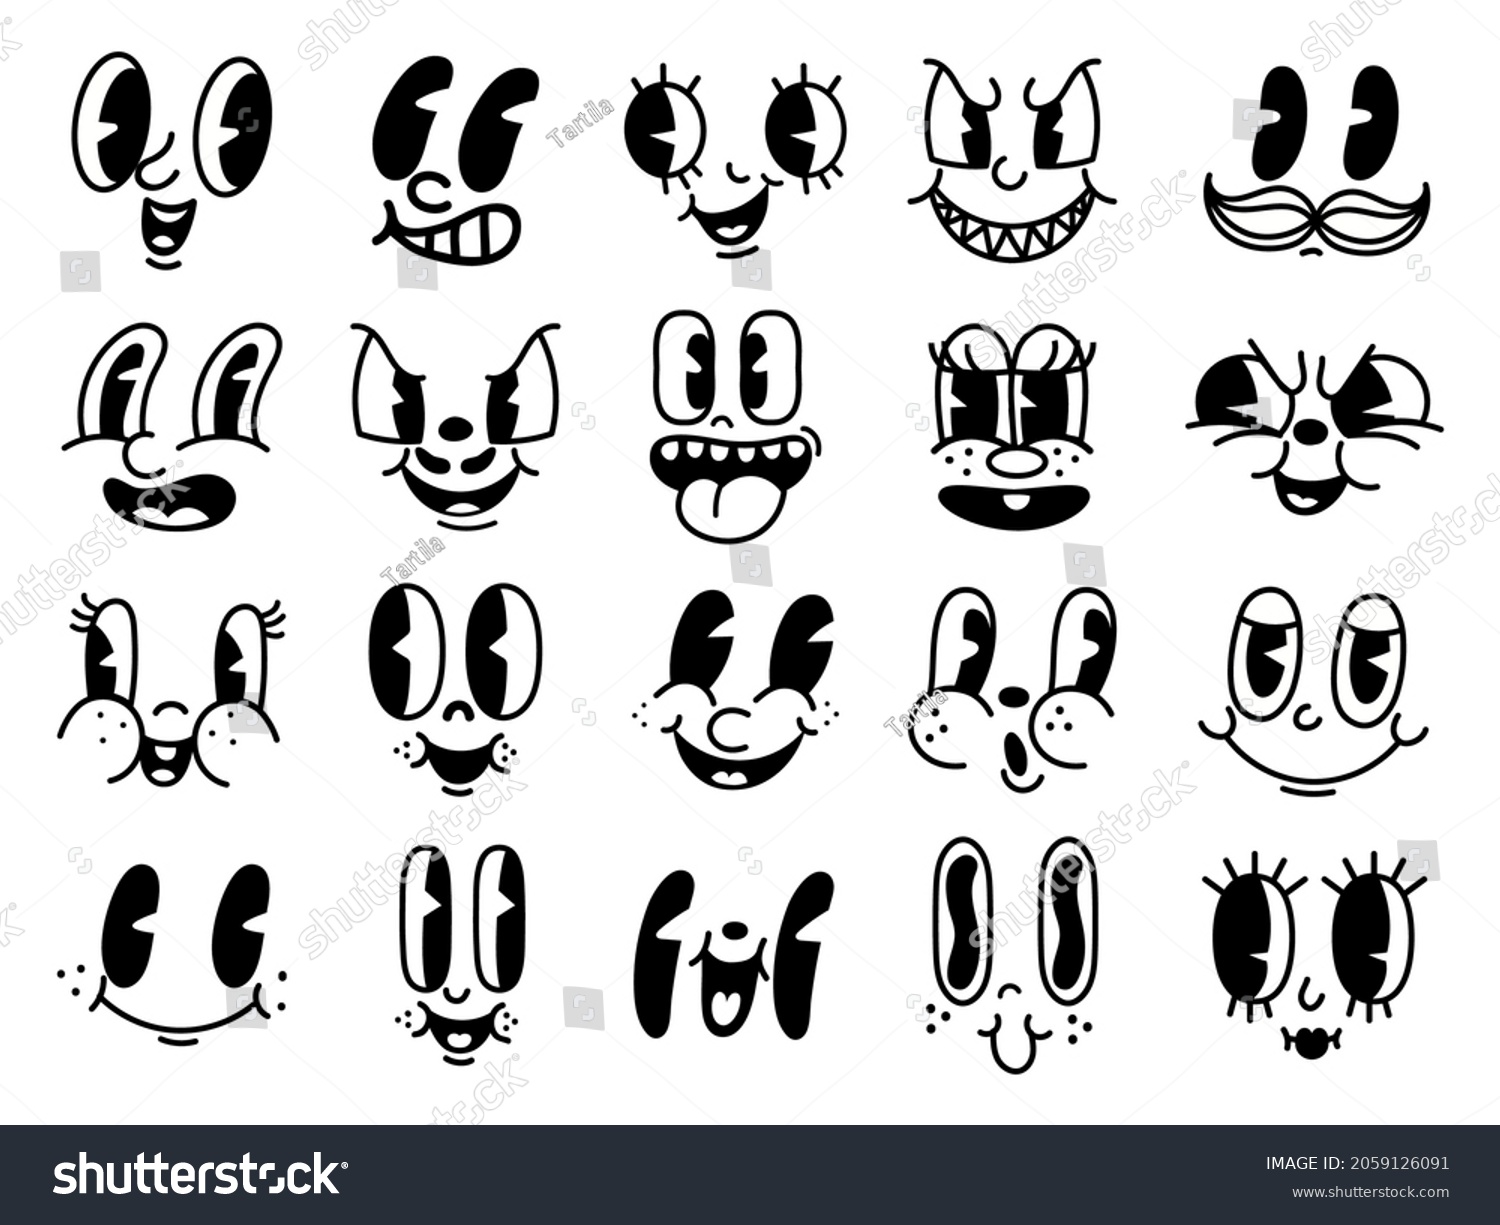 Vintage 50s cartoon and comic happy facial expressions. Old animation funny face caricatures. Retro quirky characters smile emoji vector set. Cute avatars with big eyes, cheeks and mouth #2059126091